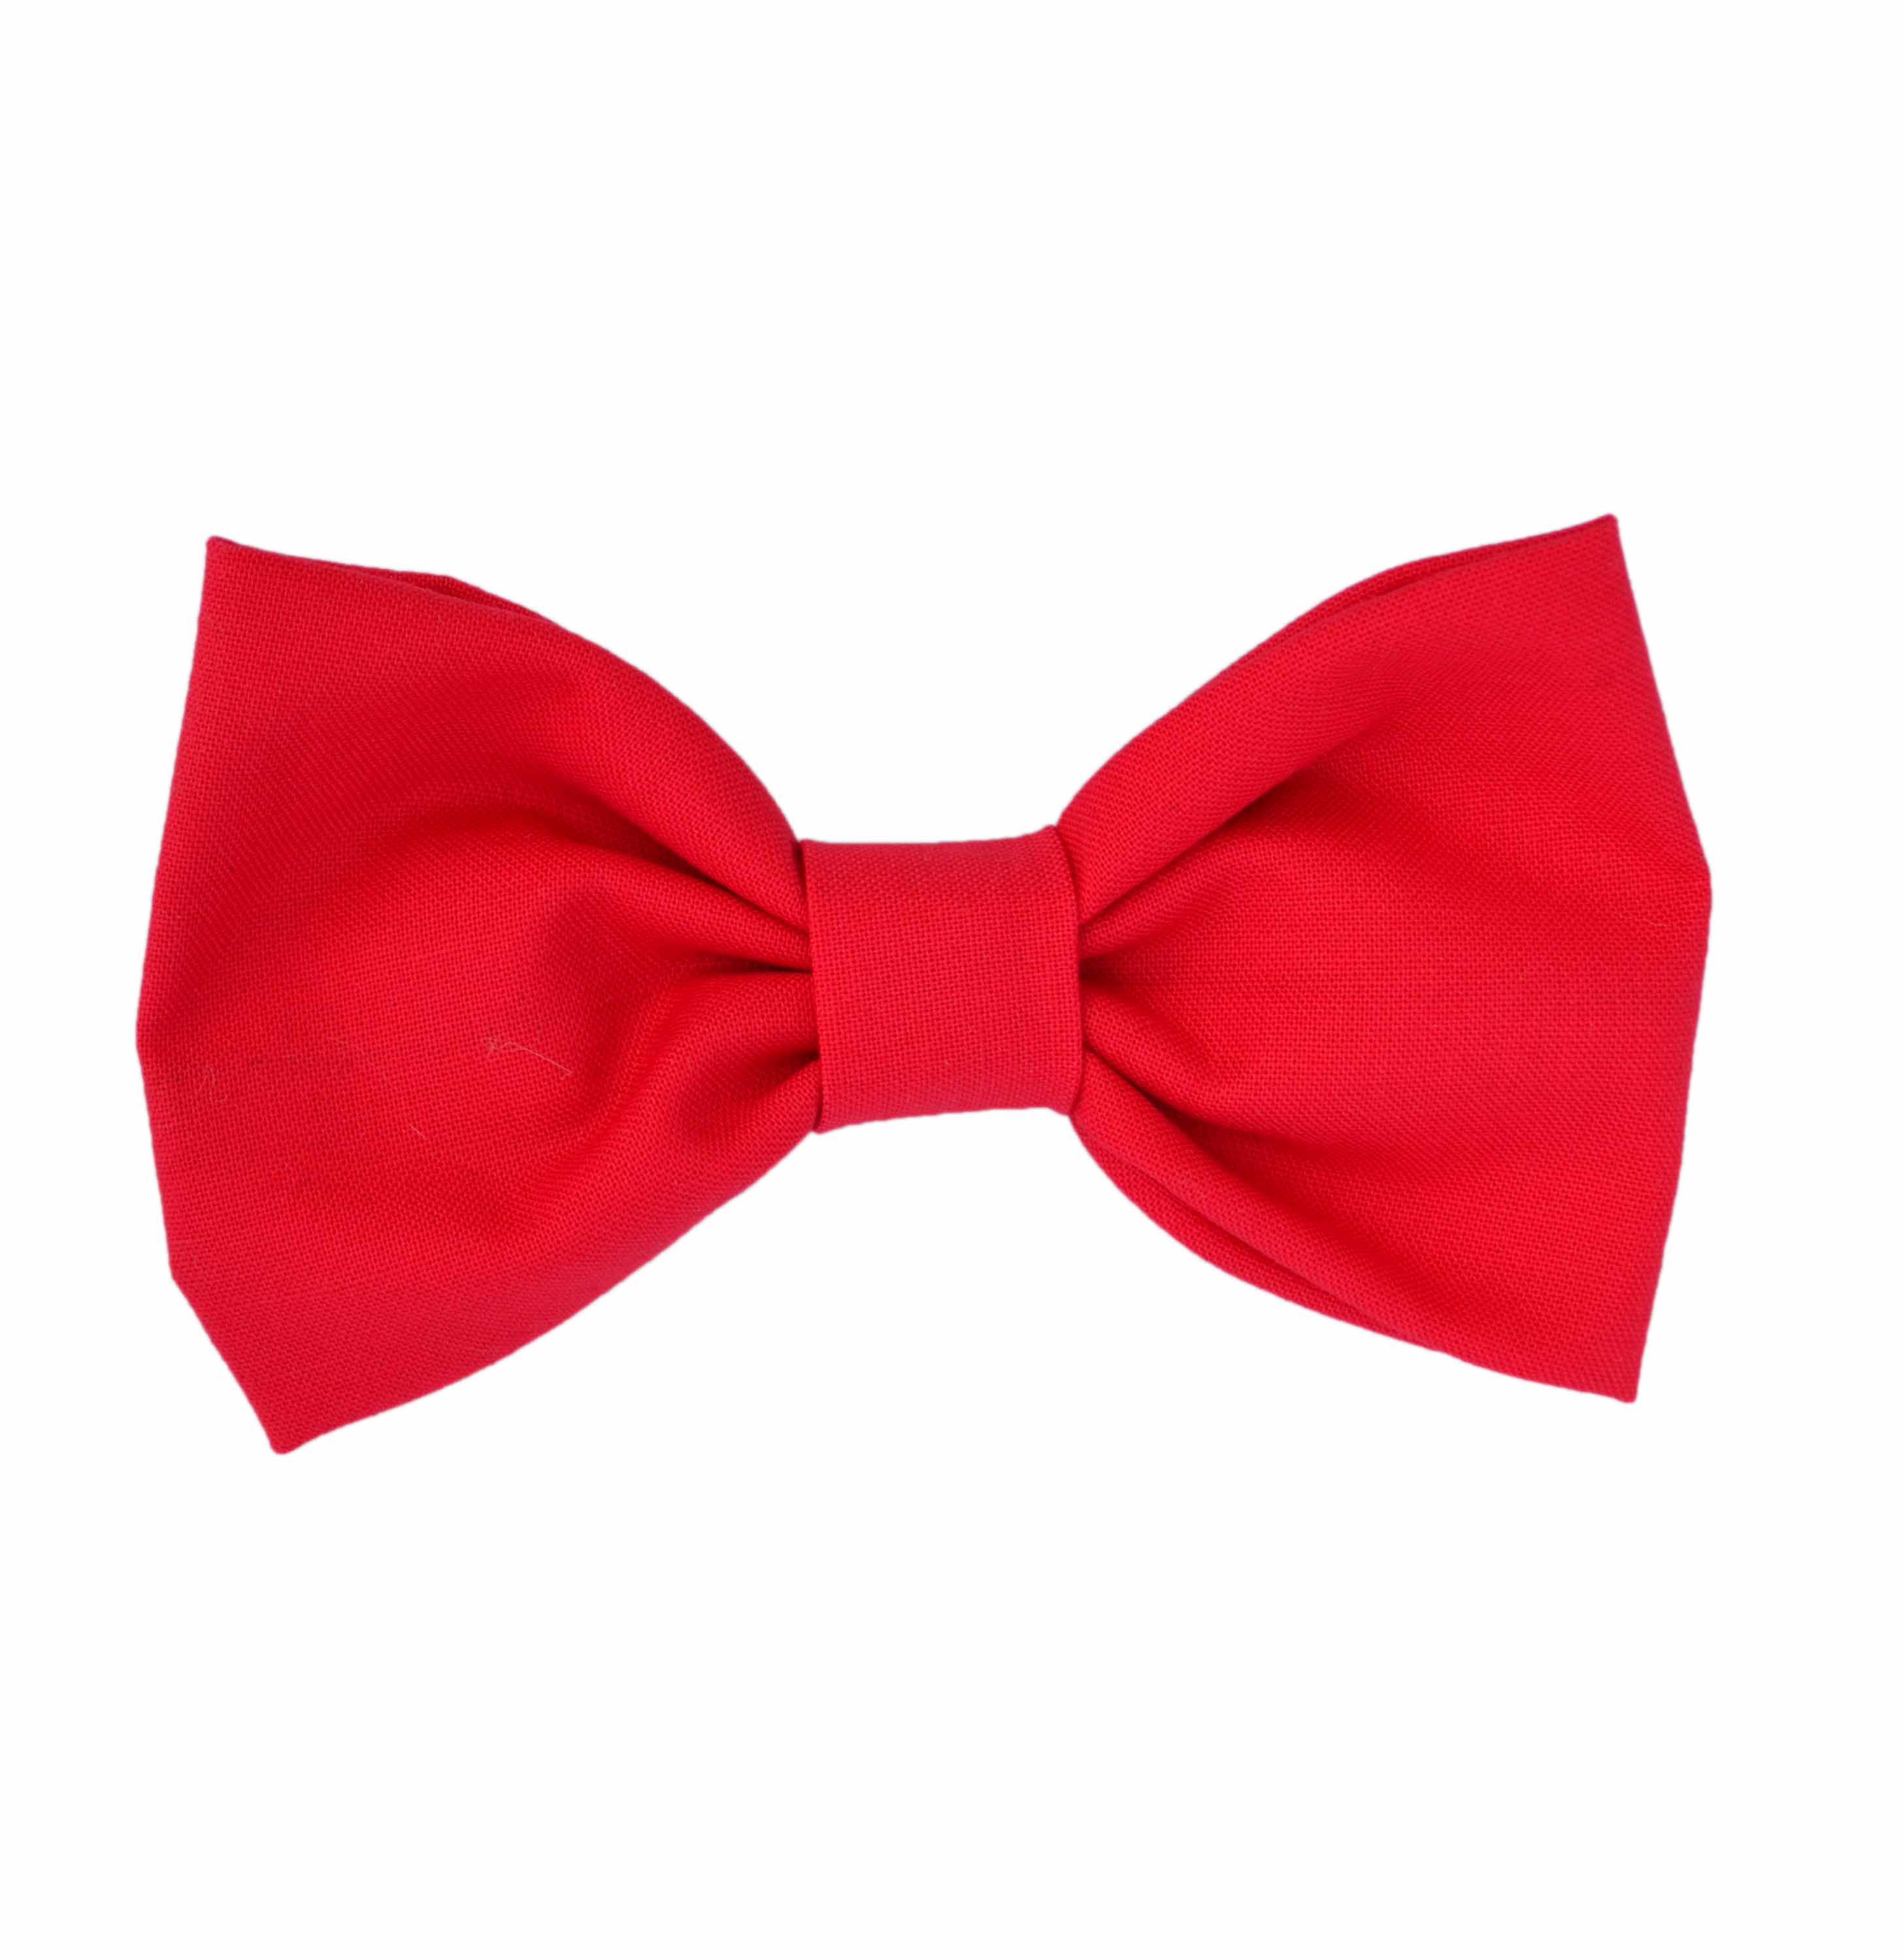 Red bow tie clipart